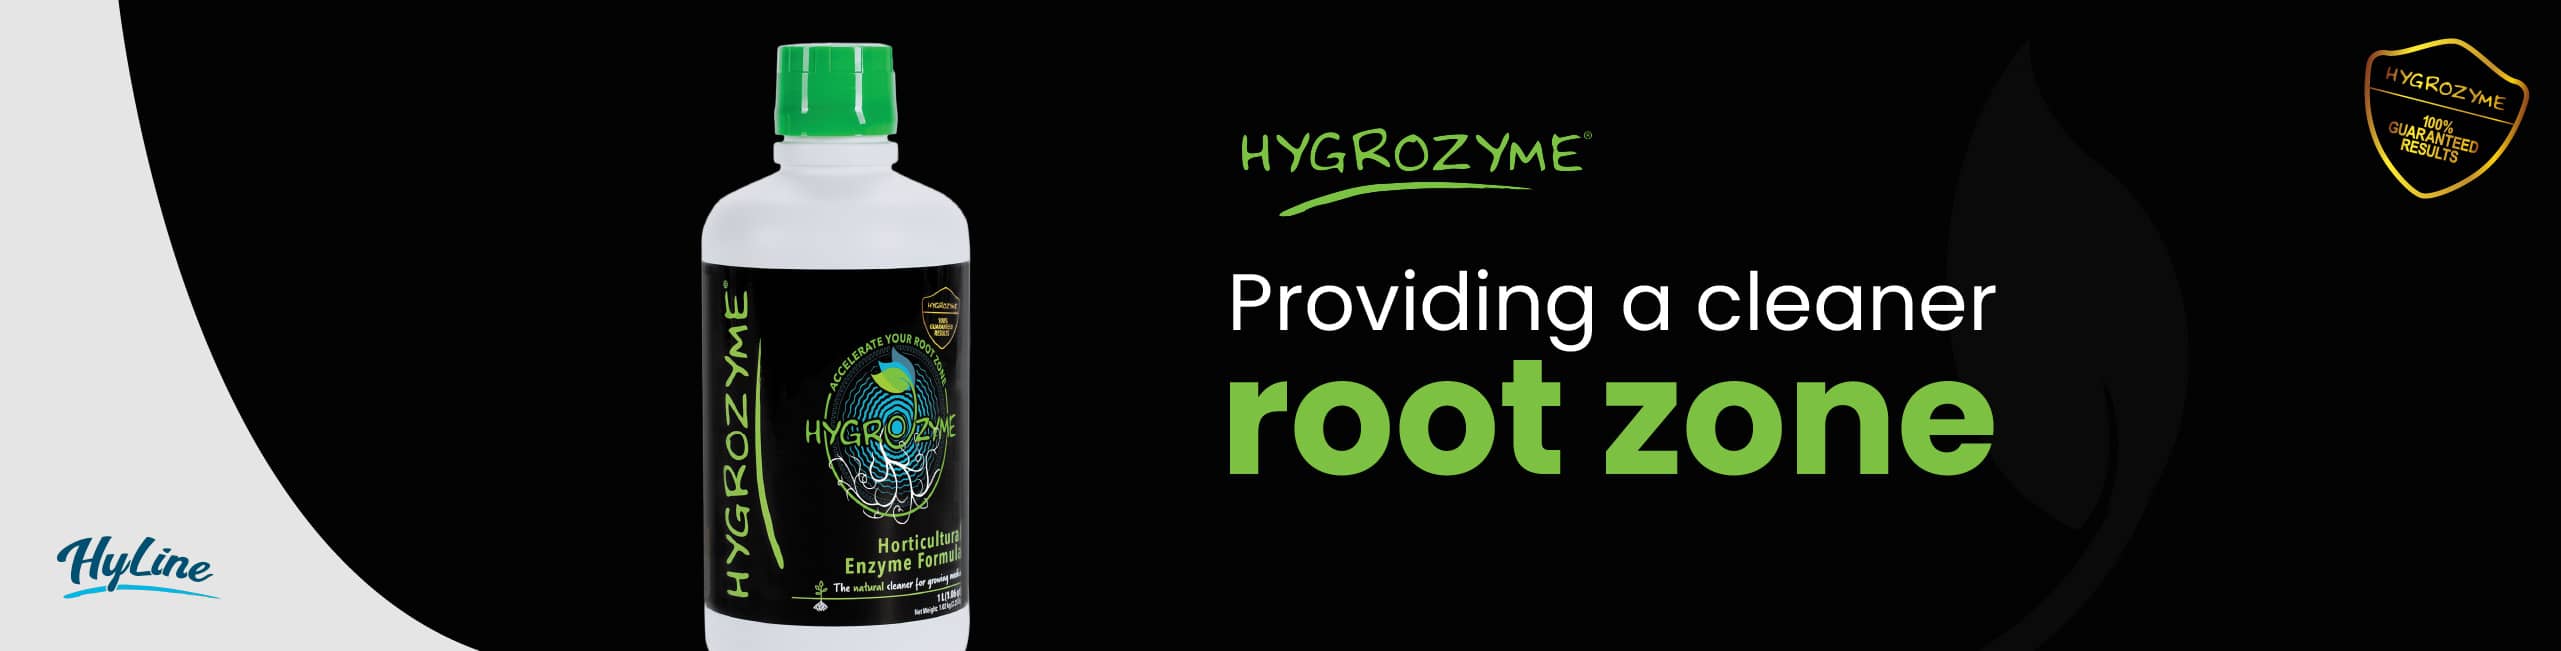 Hygrozyme Providing A Cleaner Root Zone